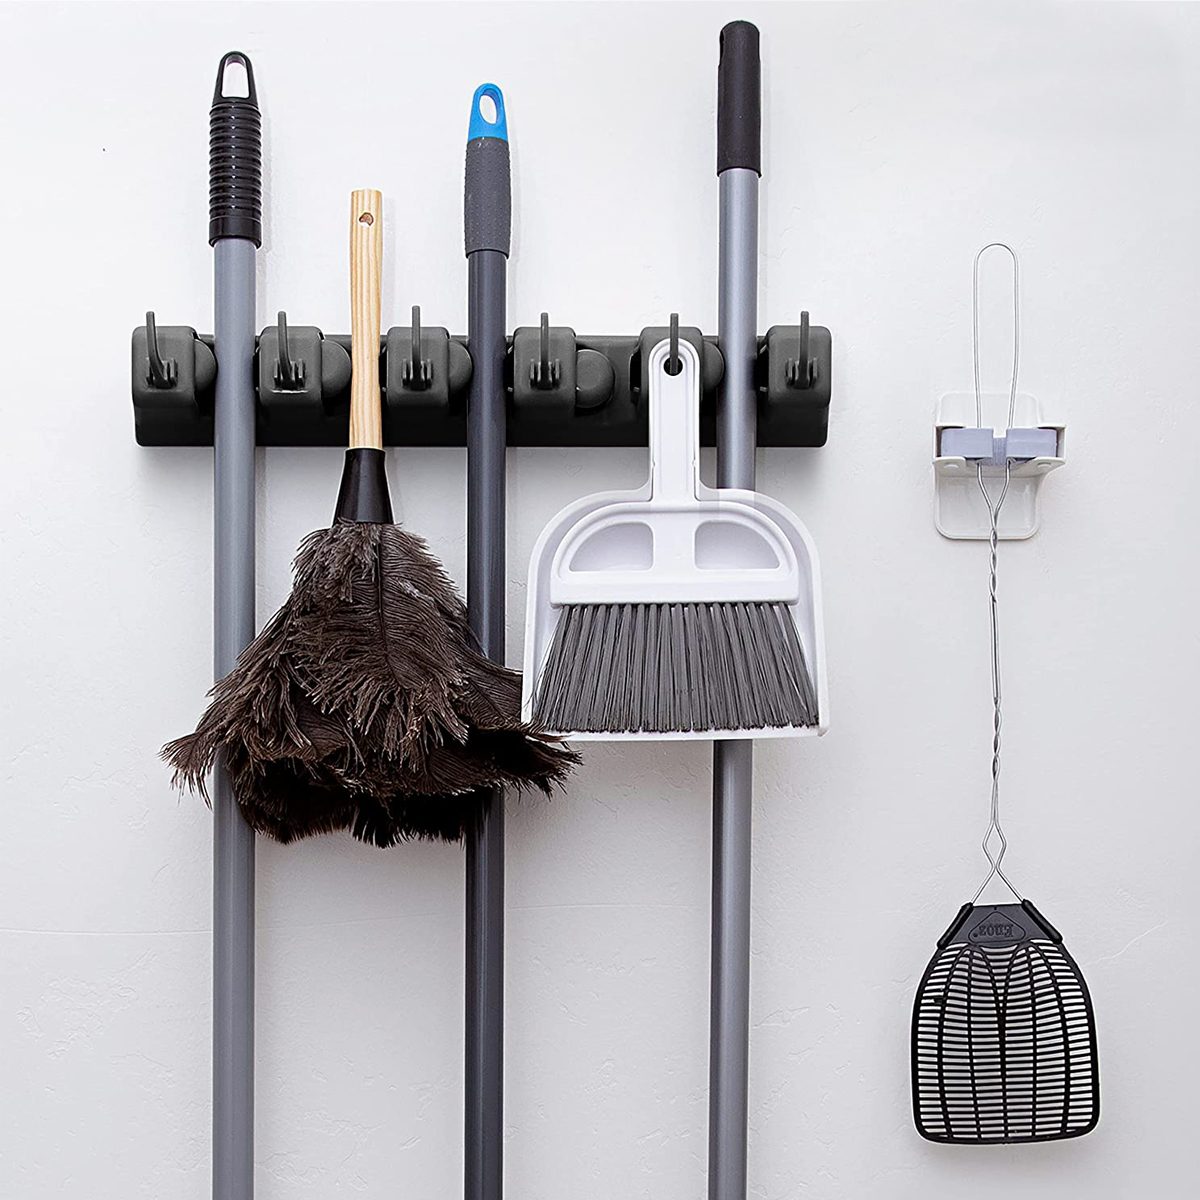 Mop and Broom Holder Wall Mounted,Garden Tool Organizer,Broom Organizer Wall Mount,Garage Tool Organizer for Wall Mop Home Must Haves Home